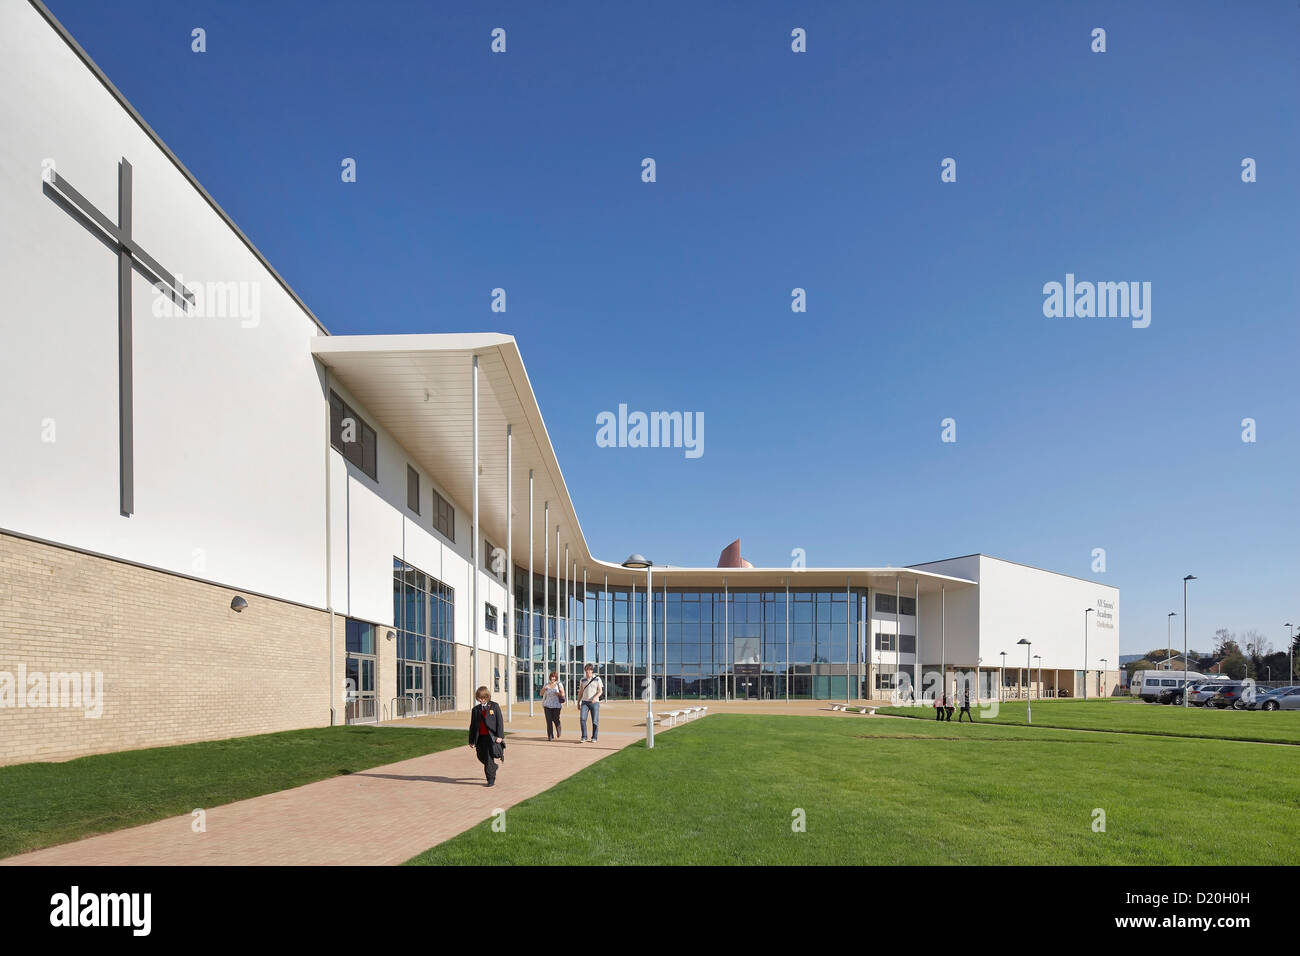 All Saints Academy, Chelteham, United Kingdom. Architect: Nicholas Hare Architects LLP, 2012. Perspective of facade with  main e Stock Photo